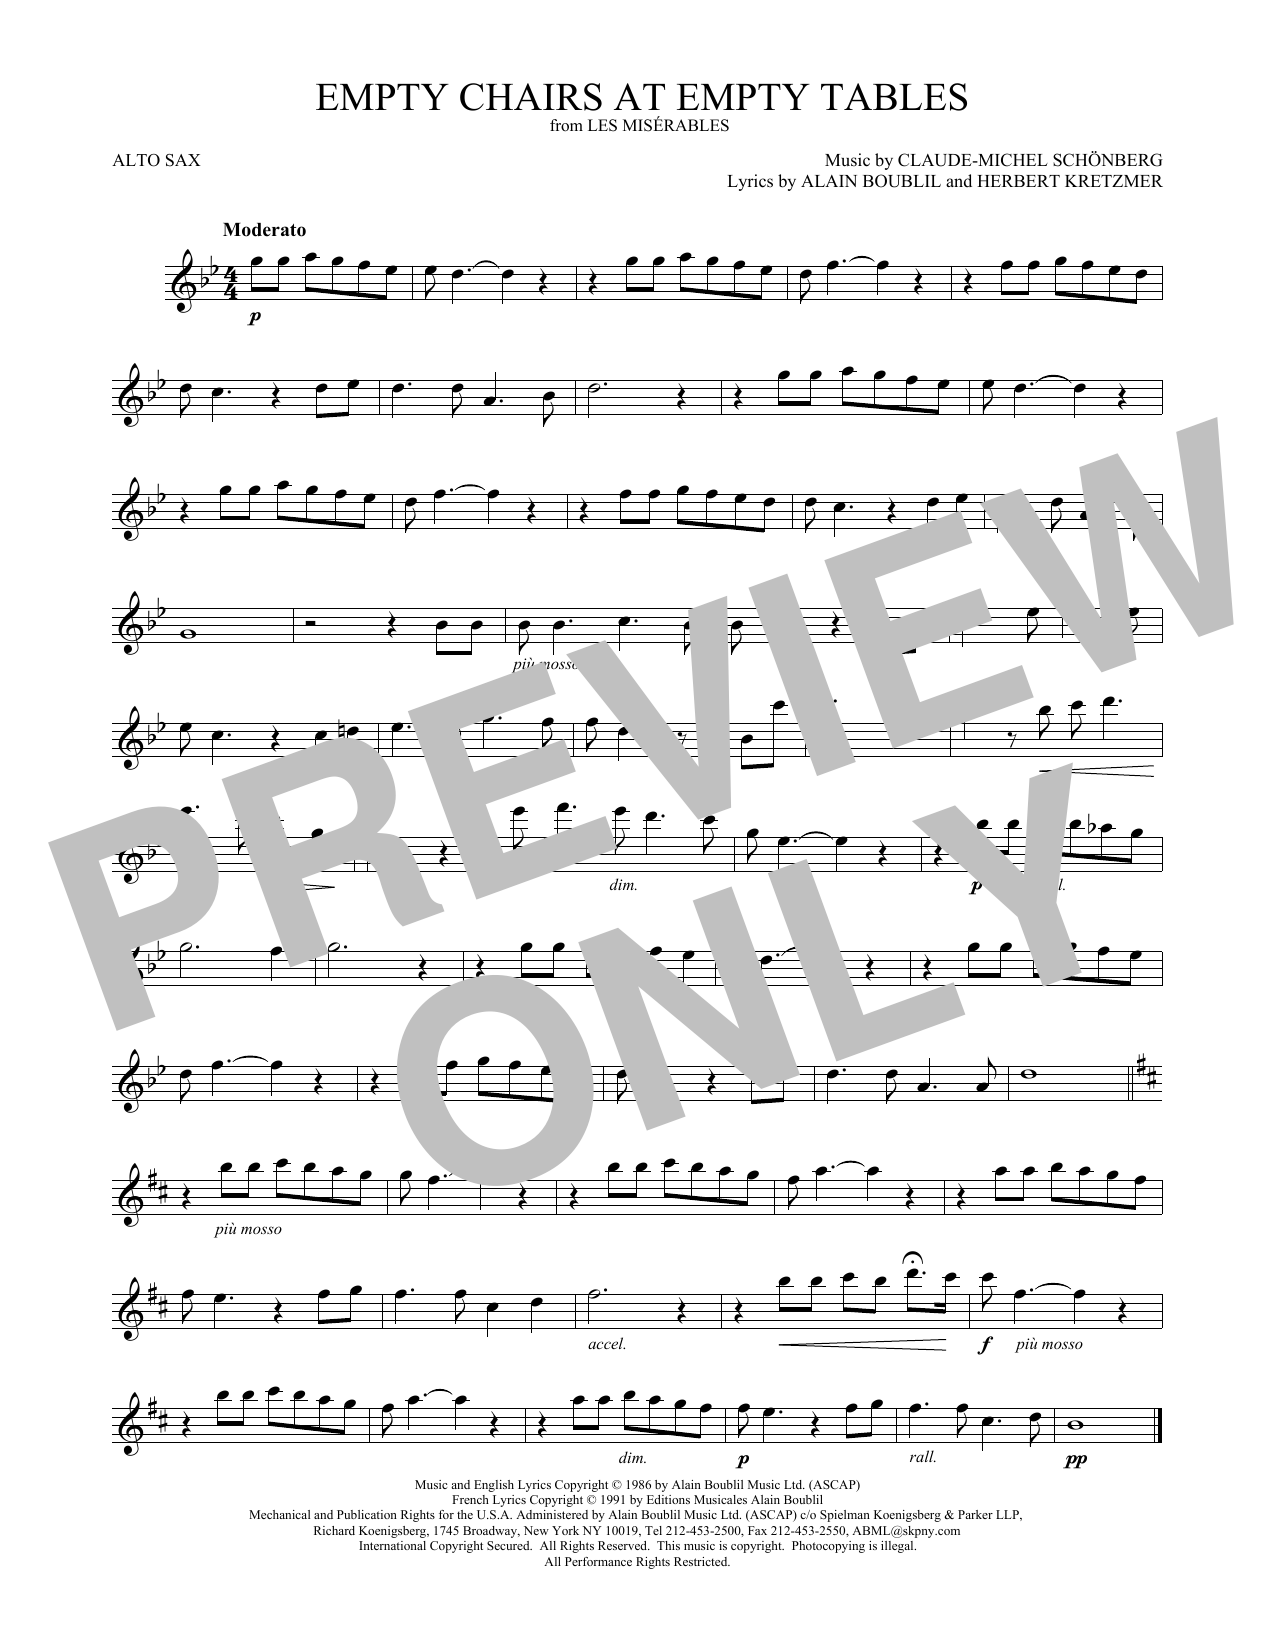 Download Claude-Michel Schonberg Empty Chairs At Empty Tables Sheet Music